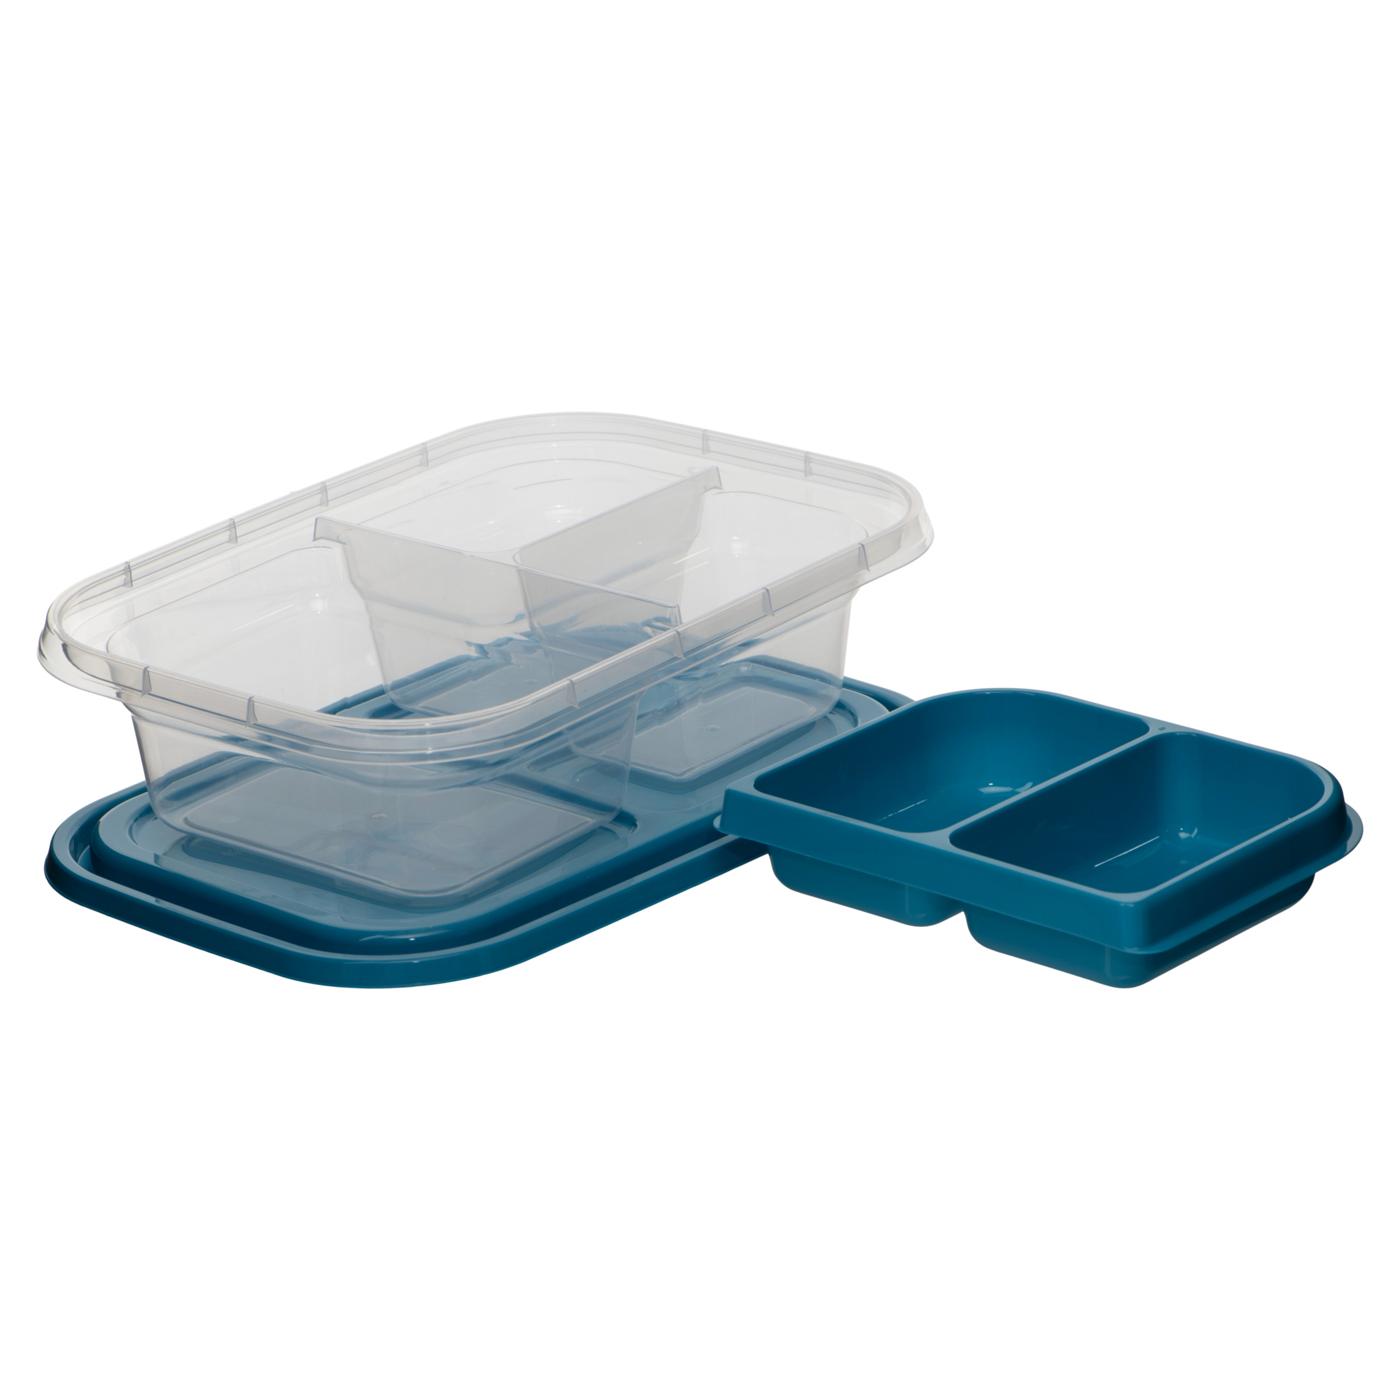 Good Cook EveryWare Bento Box Containers + Lids - Shop Food